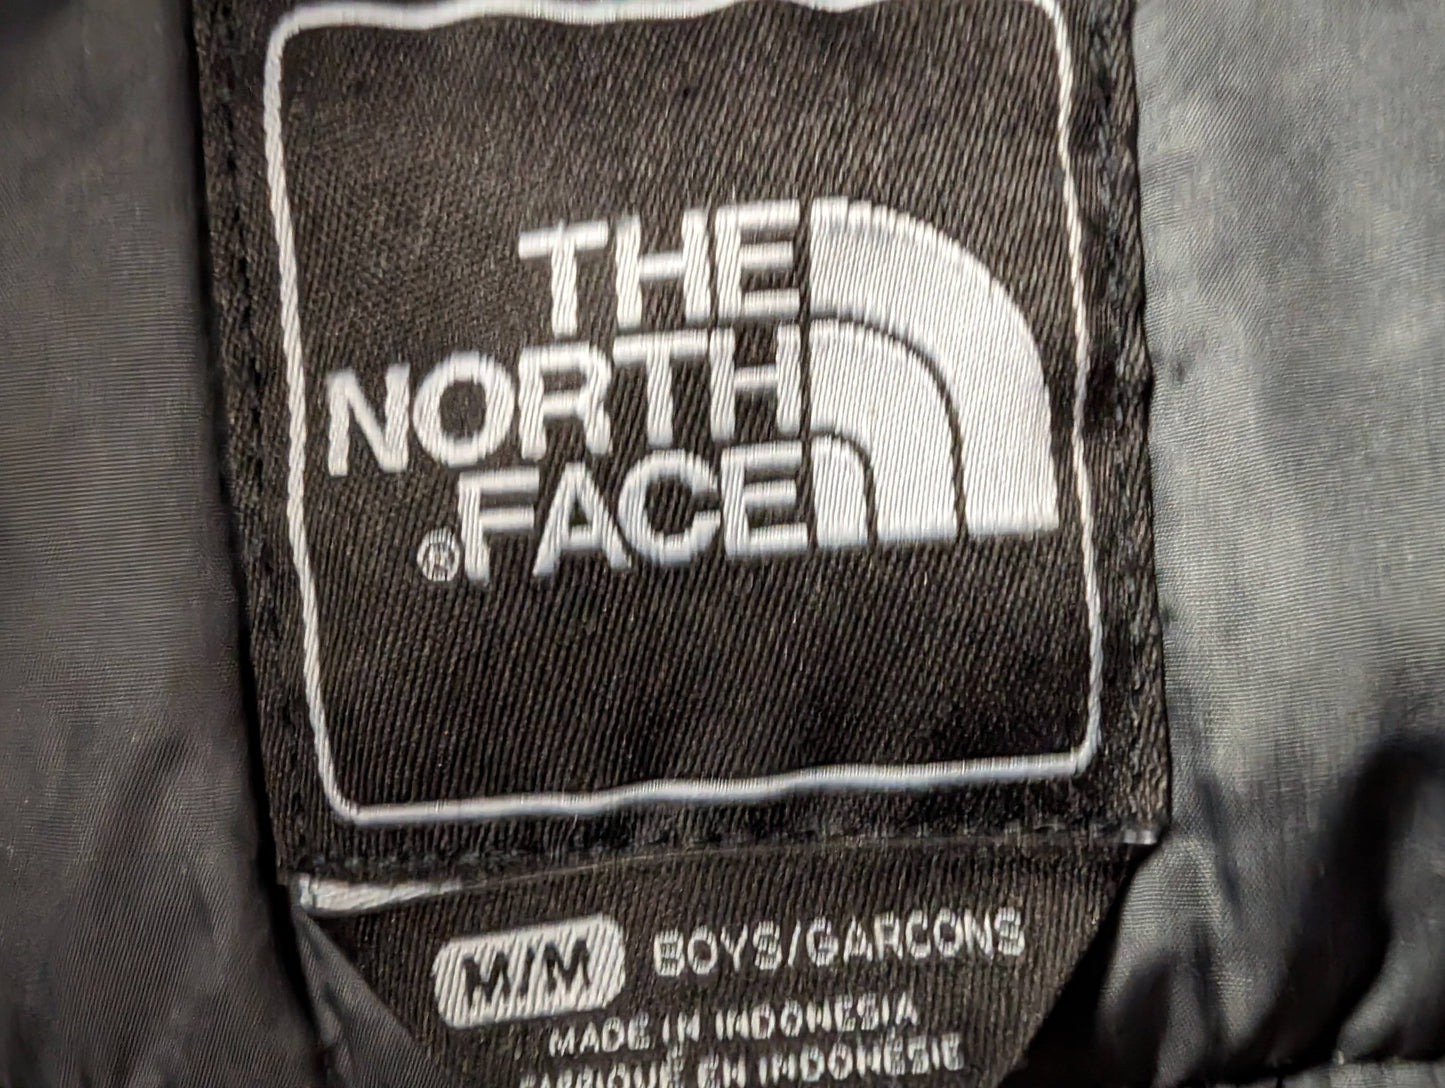 The North Face Youth Hooded Ski/Snowboard Jacket/Coat Size Youth Medium Color Yellow Condition Used